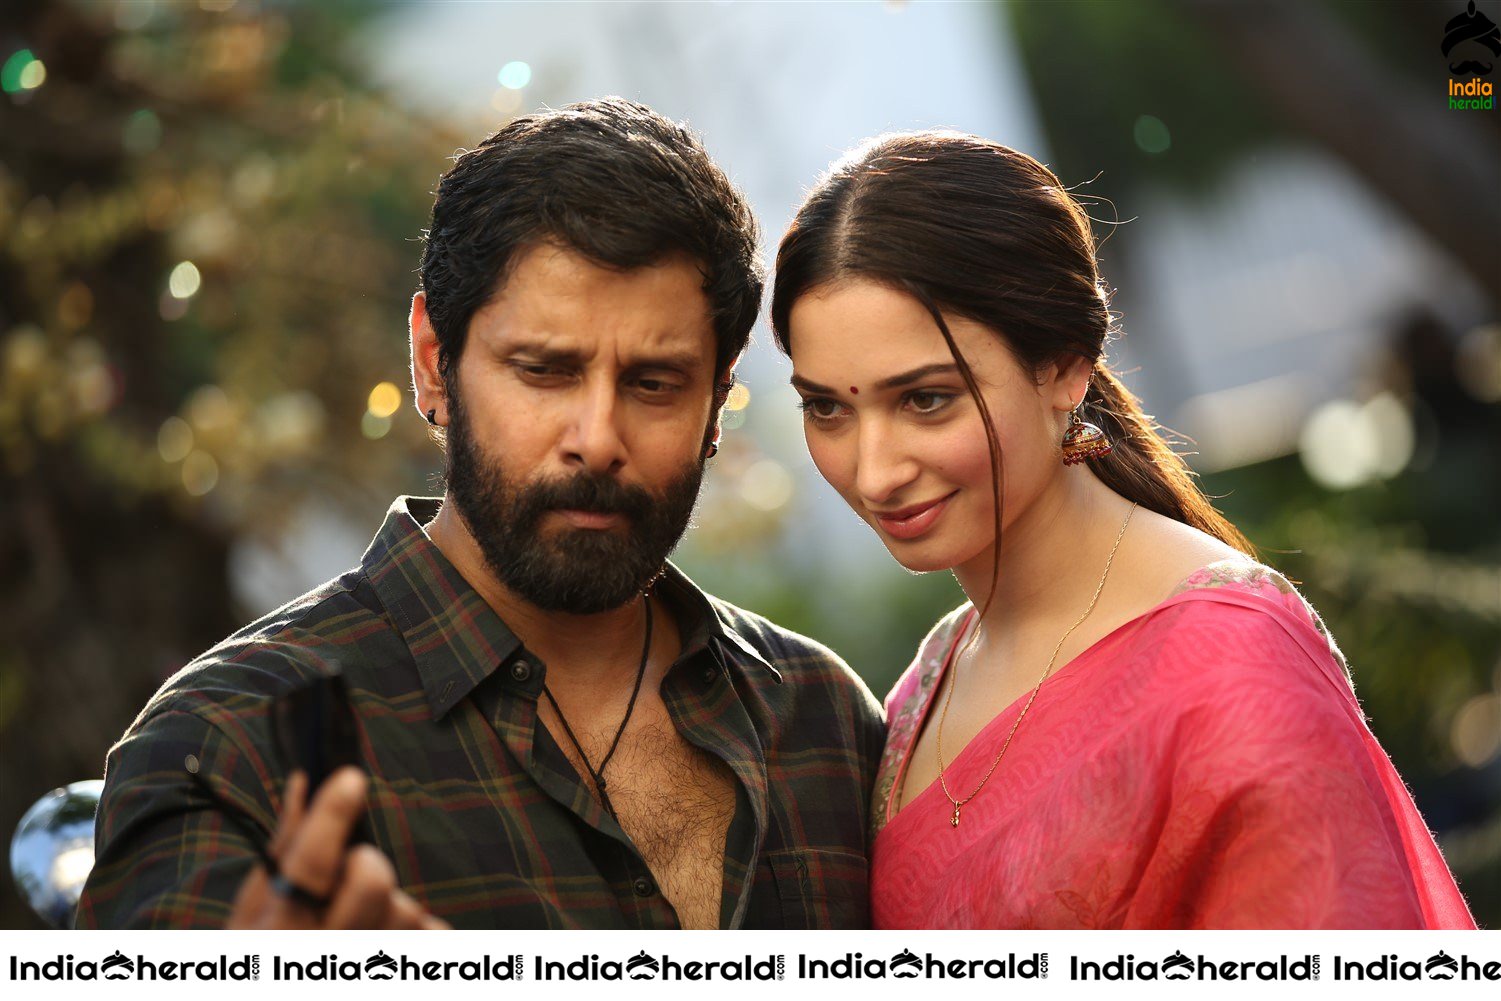 Actor Vikram Photos with Hot Tamanna from the movie Sketch Set 2